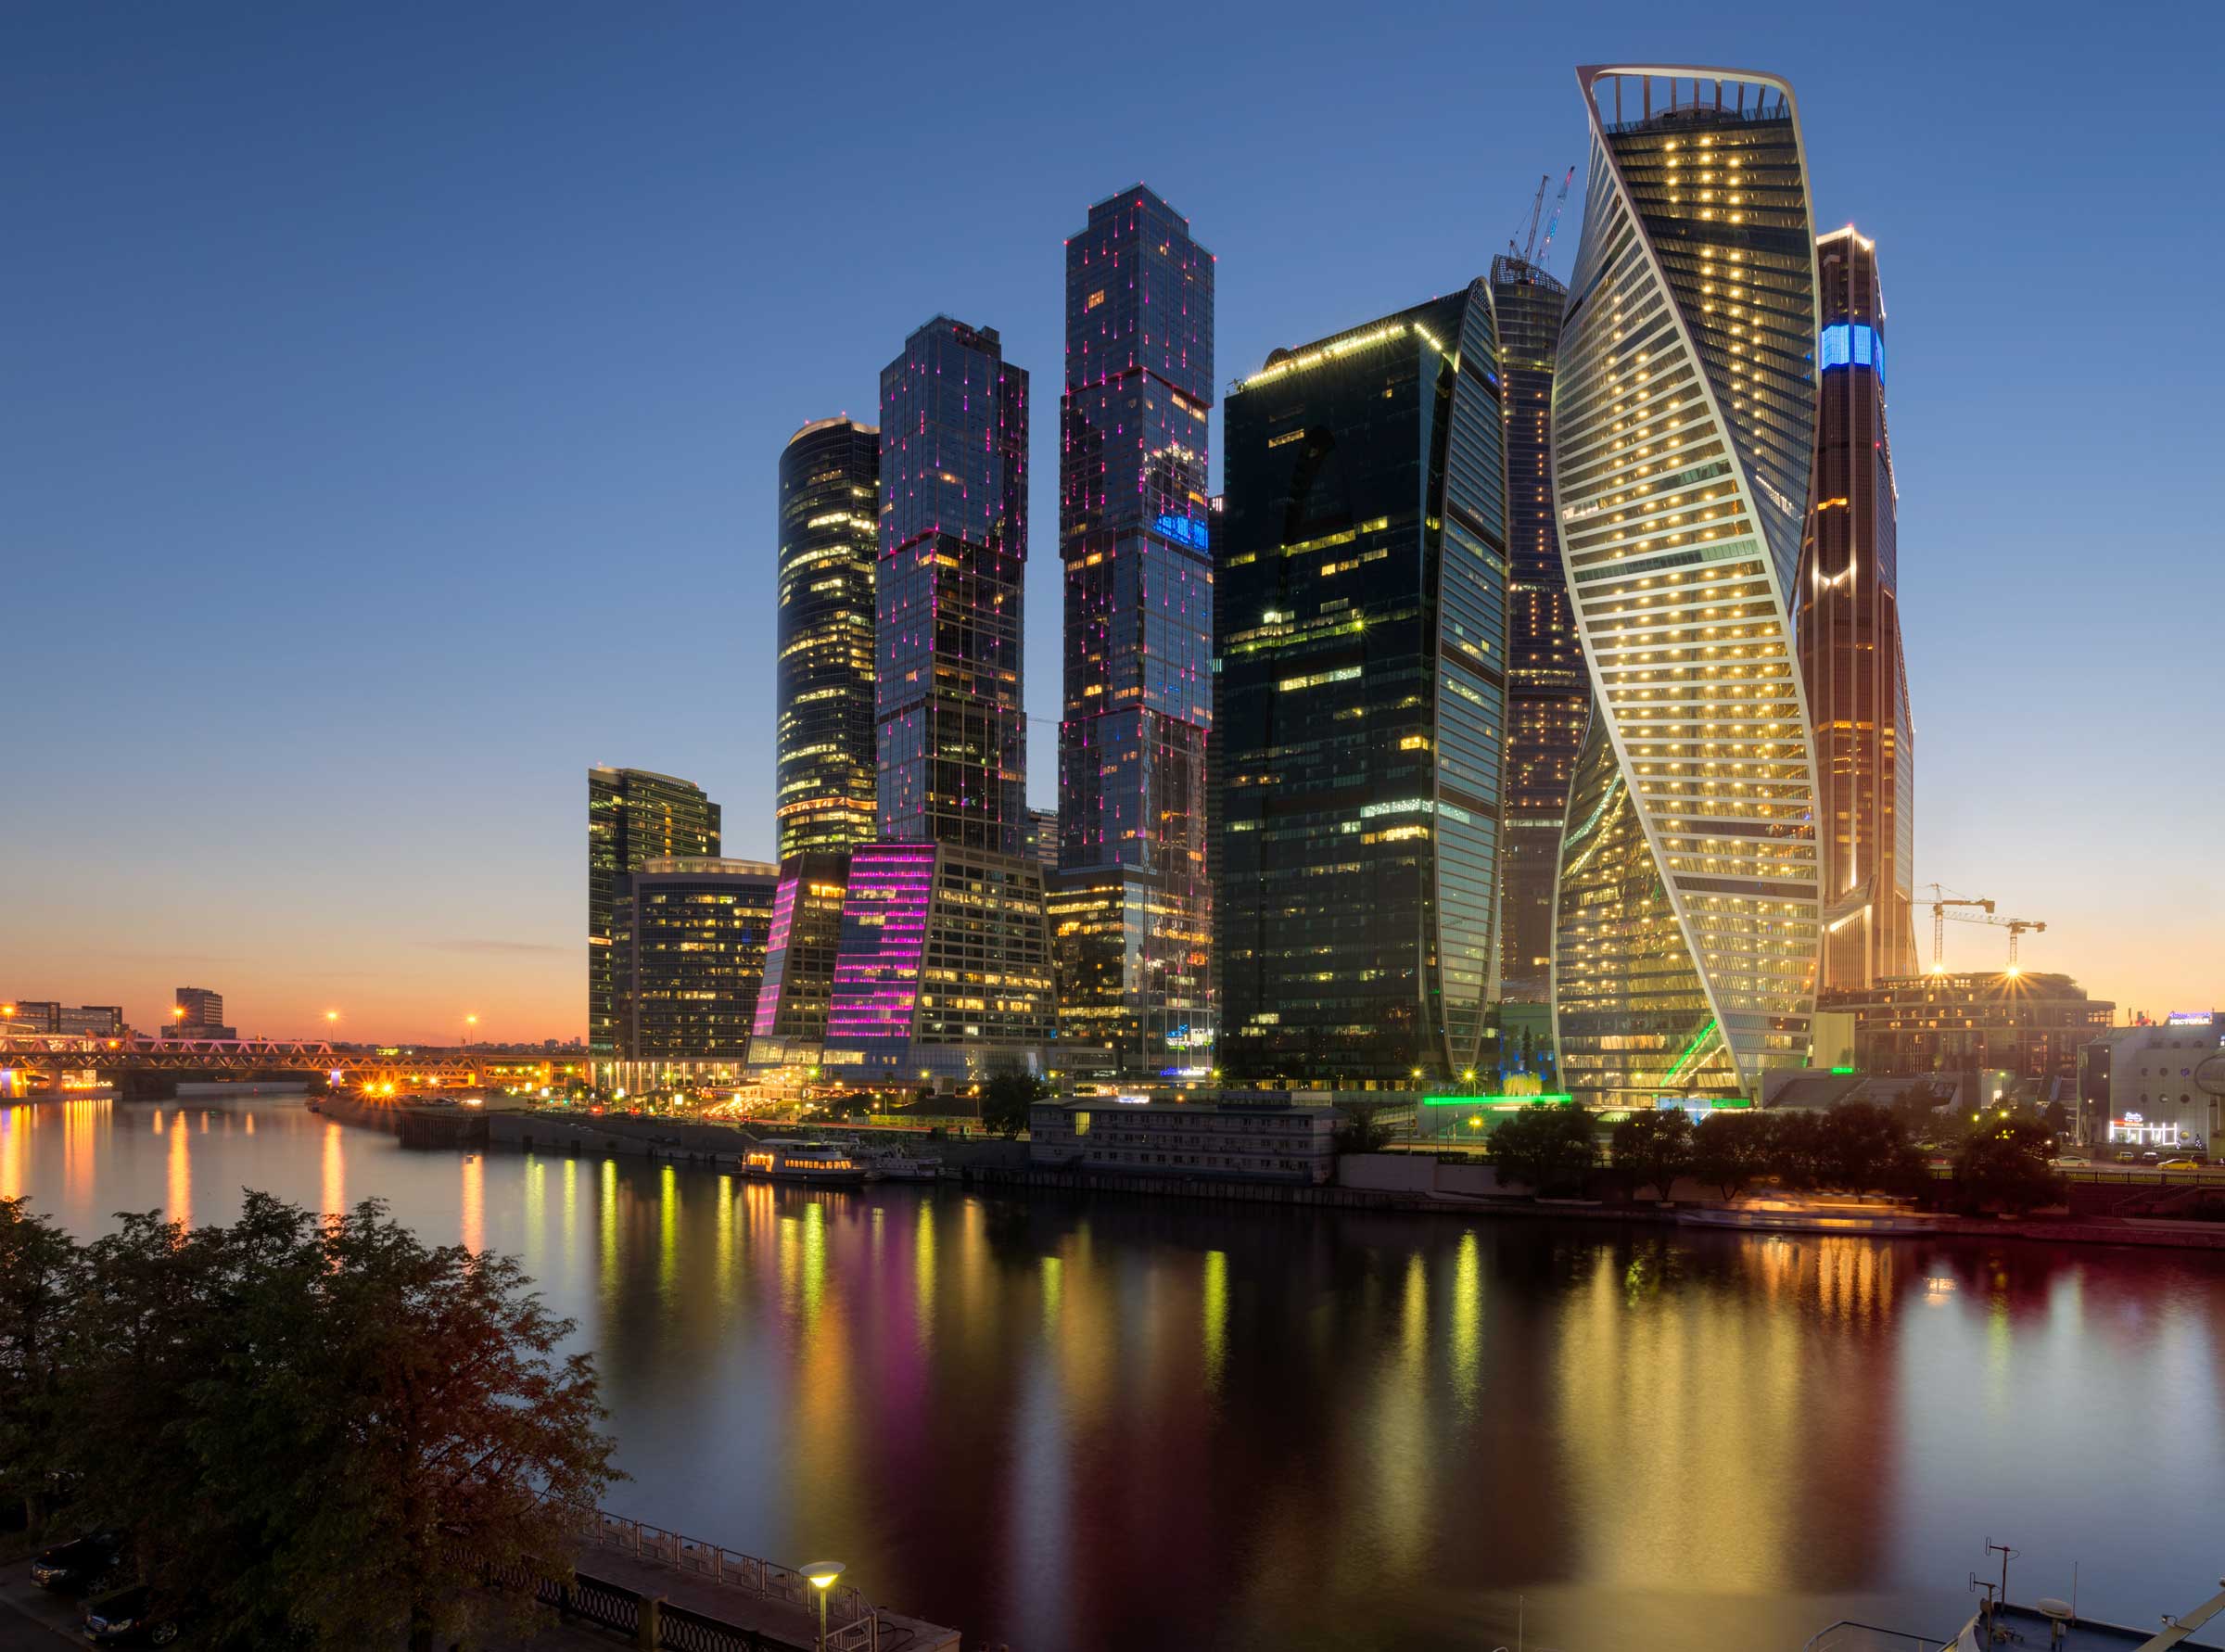 Modern skyscrapers outlined against the night sky, Moscow, Russia